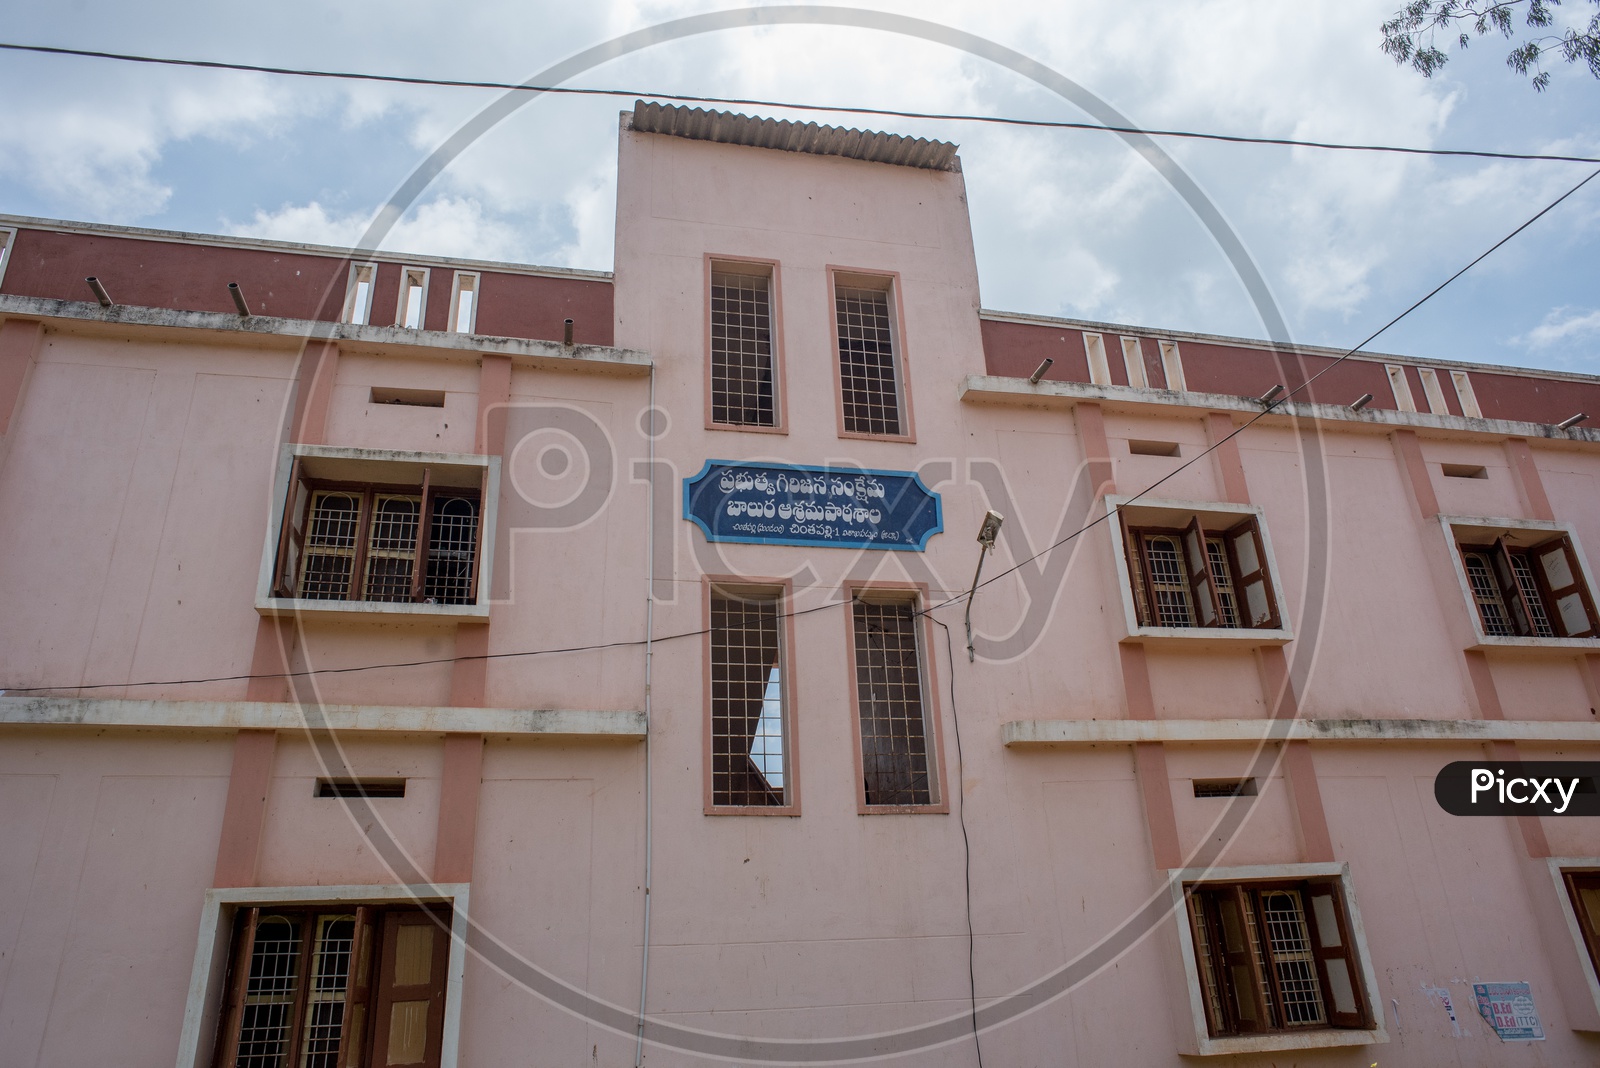 government college in chintapalle